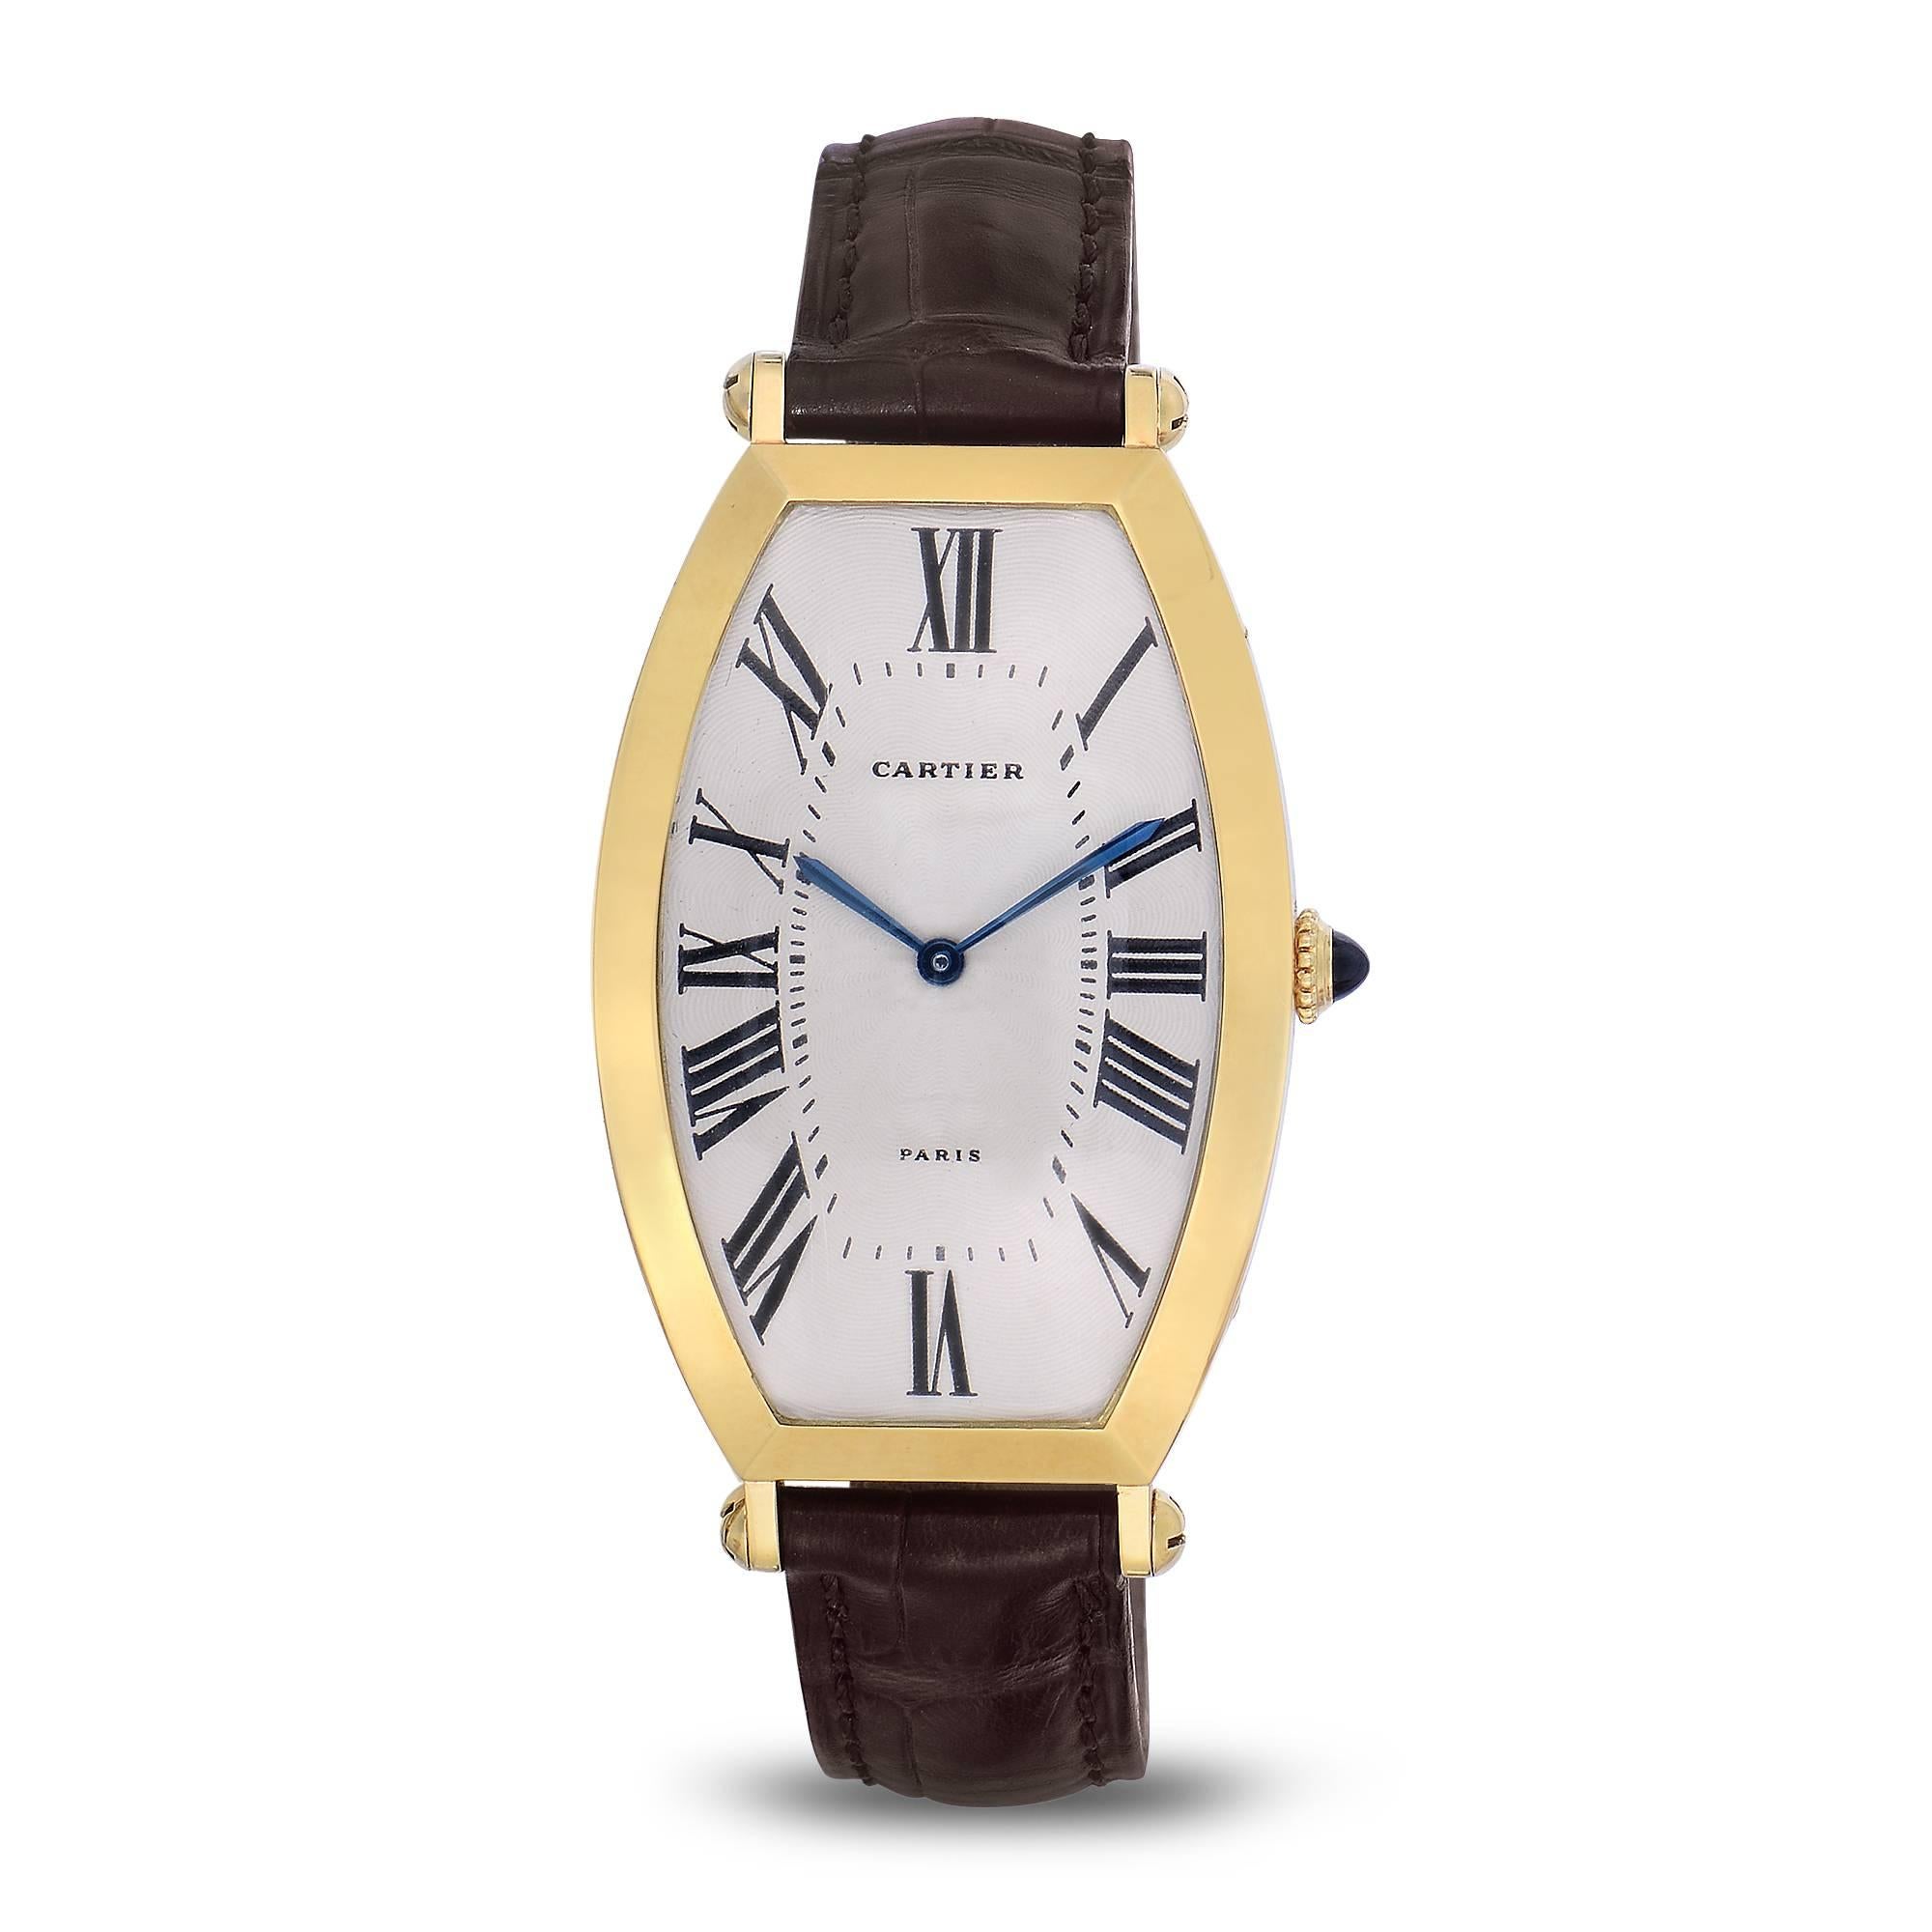 Vintage Cartier Paris Solid 18K Yellow Gold Watch
Tonneau Shape
Manual Wind Movement
Beautiful Guilloche Dial with Roman Numerals
Classic Blue Cartier Hands
Signed and Engraved Case-Back
Classic Cartier Bullet Screw Lugs 
Cartier Blue